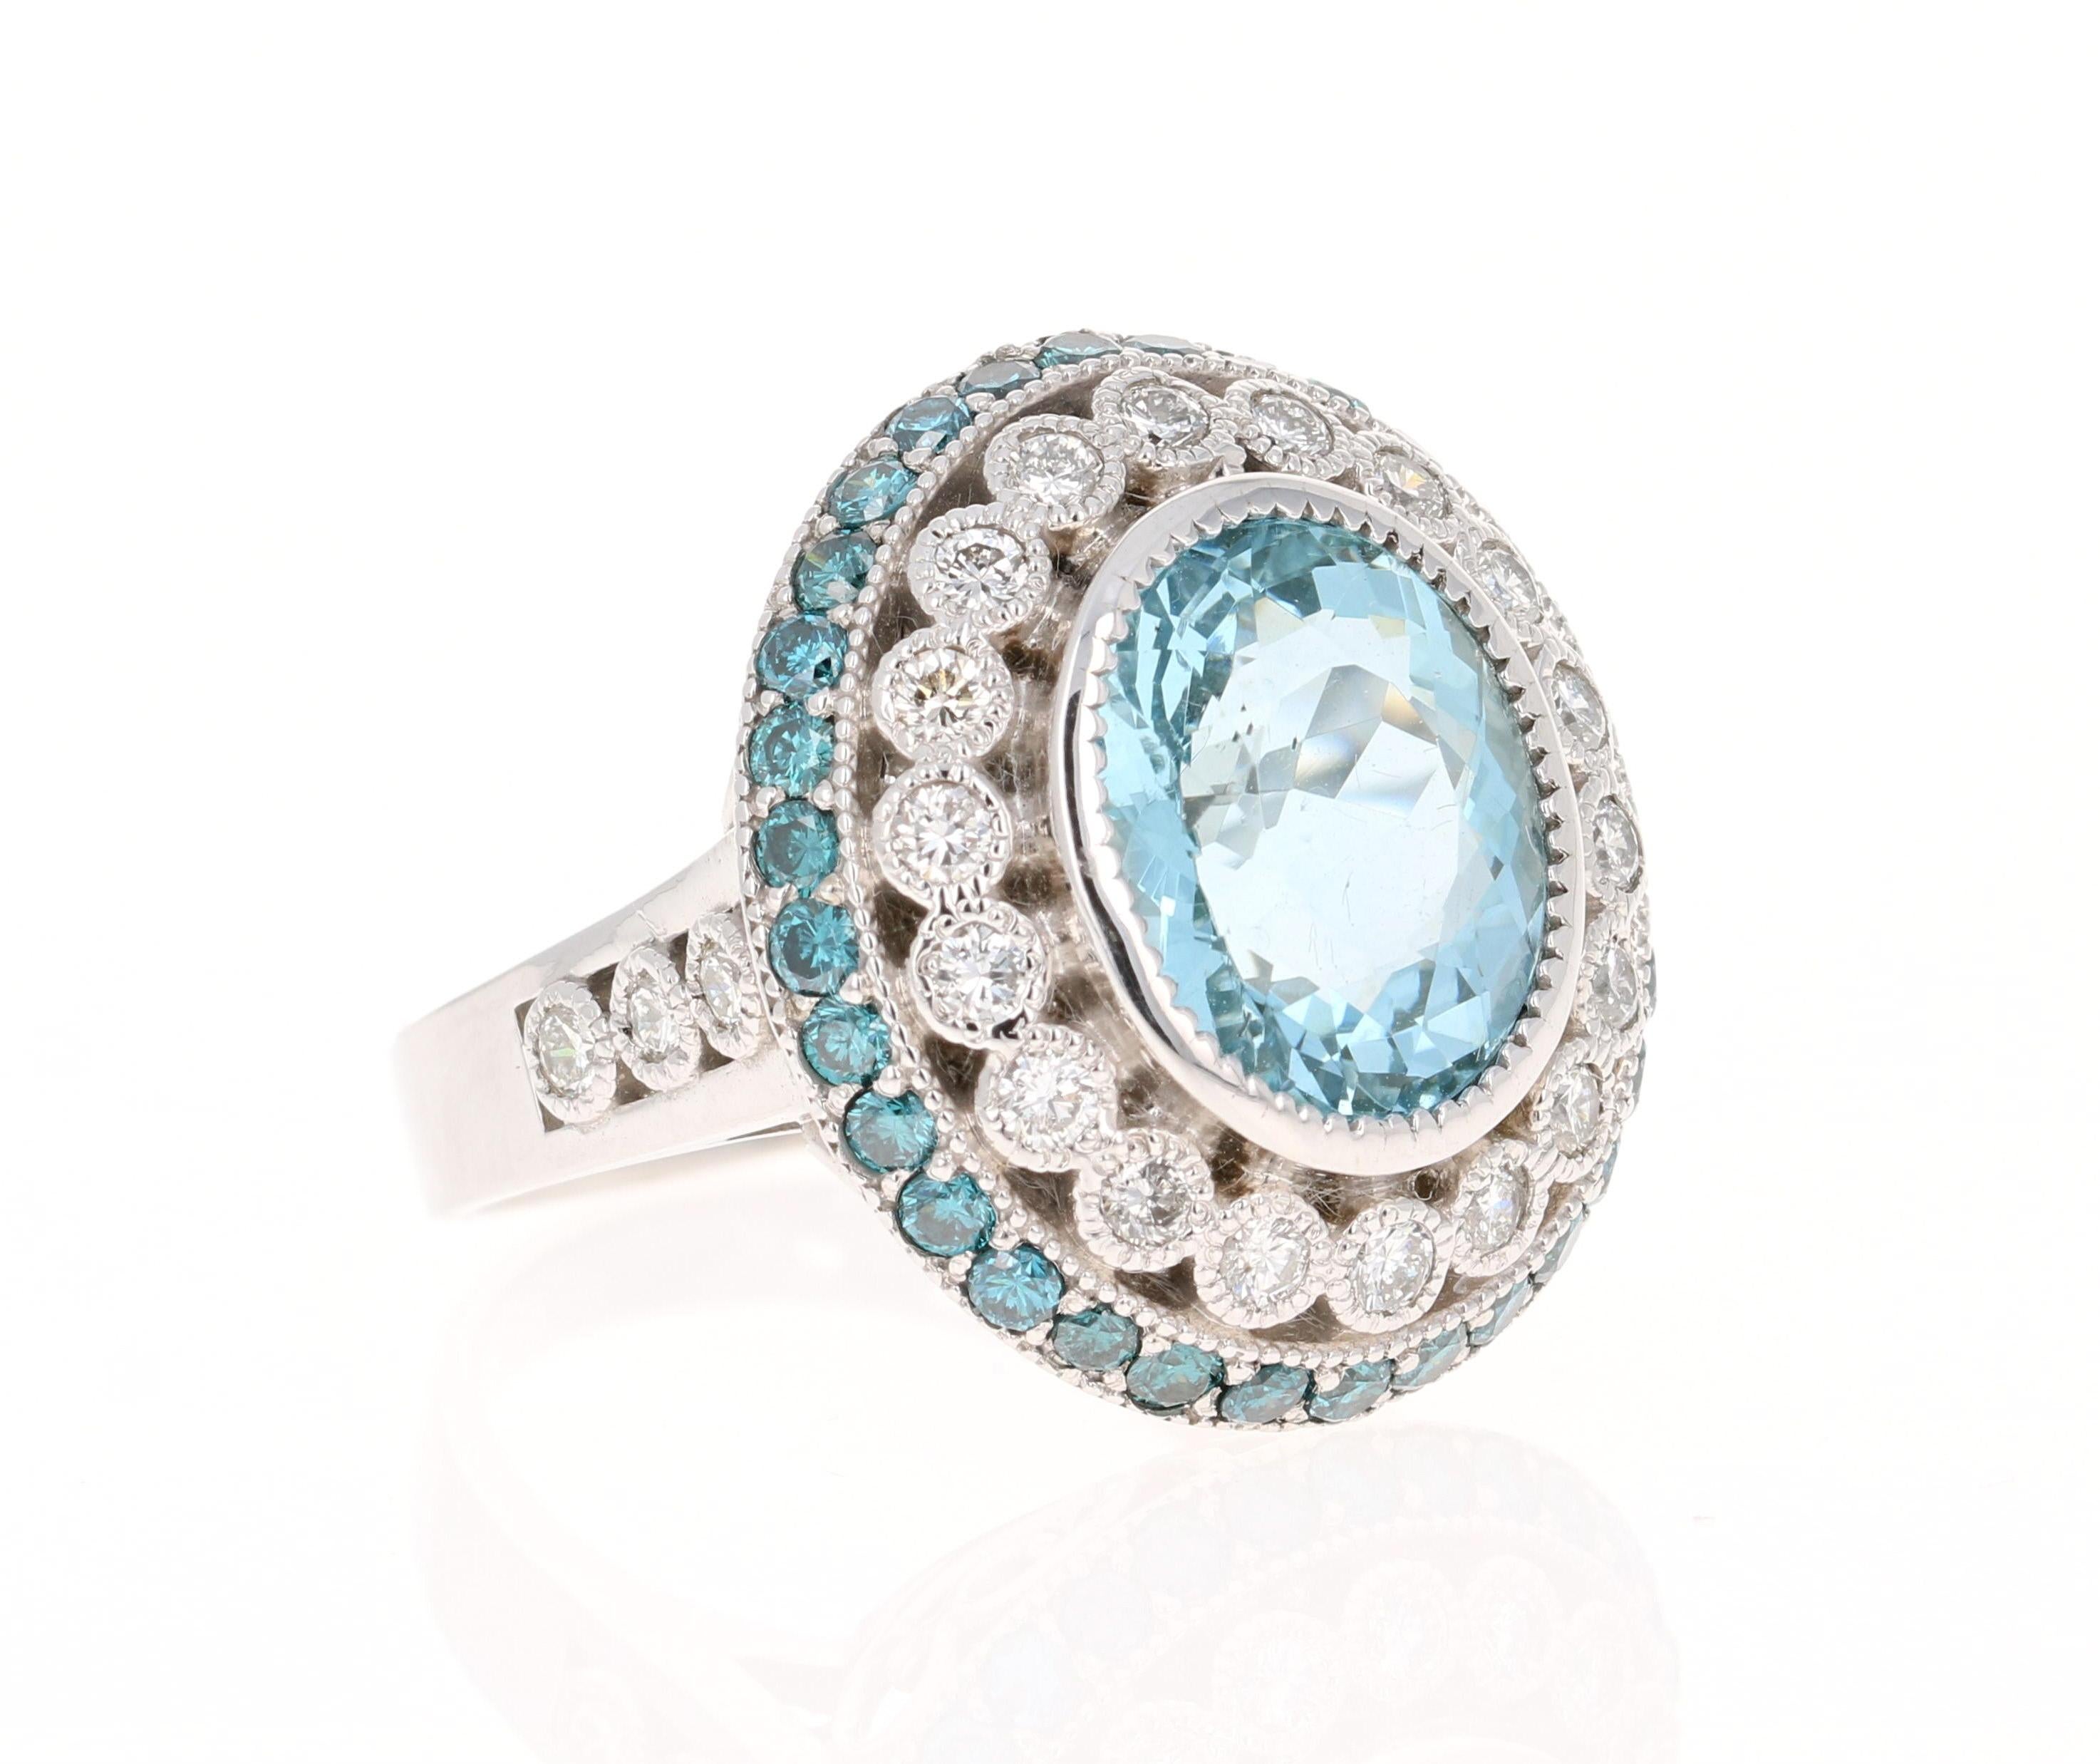 This ring has a beautiful 4.73 Carat Oval Cut Aquamarine and is surrounded by 32 Round Cut Blue Diamonds that weigh 0.96 carats. The Blue Diamonds are color treated to achieve its blue color as per industry standards. There are also 24 Round Cut